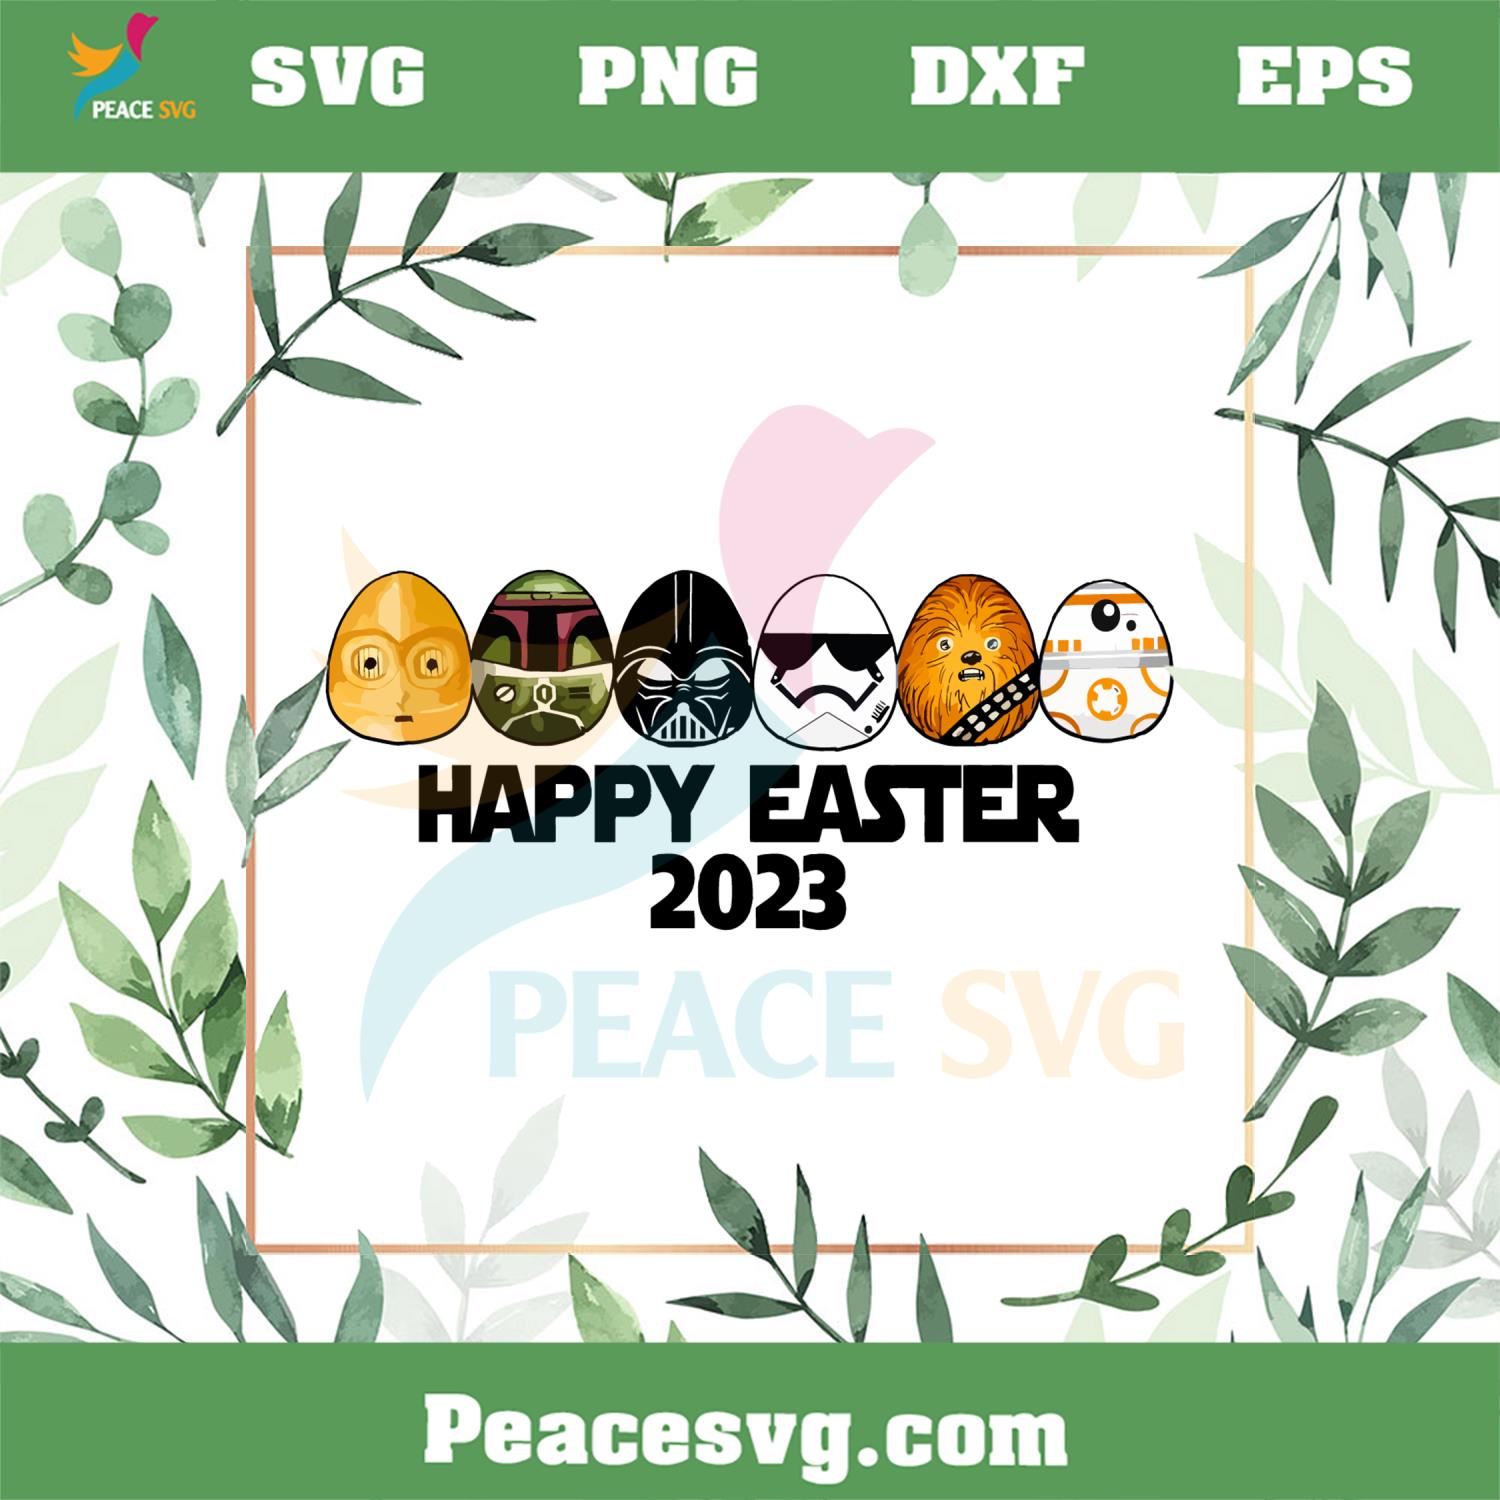 Star Wars Happy Easter 2023 Star Wars Easter Eggs SVG Cutting Files